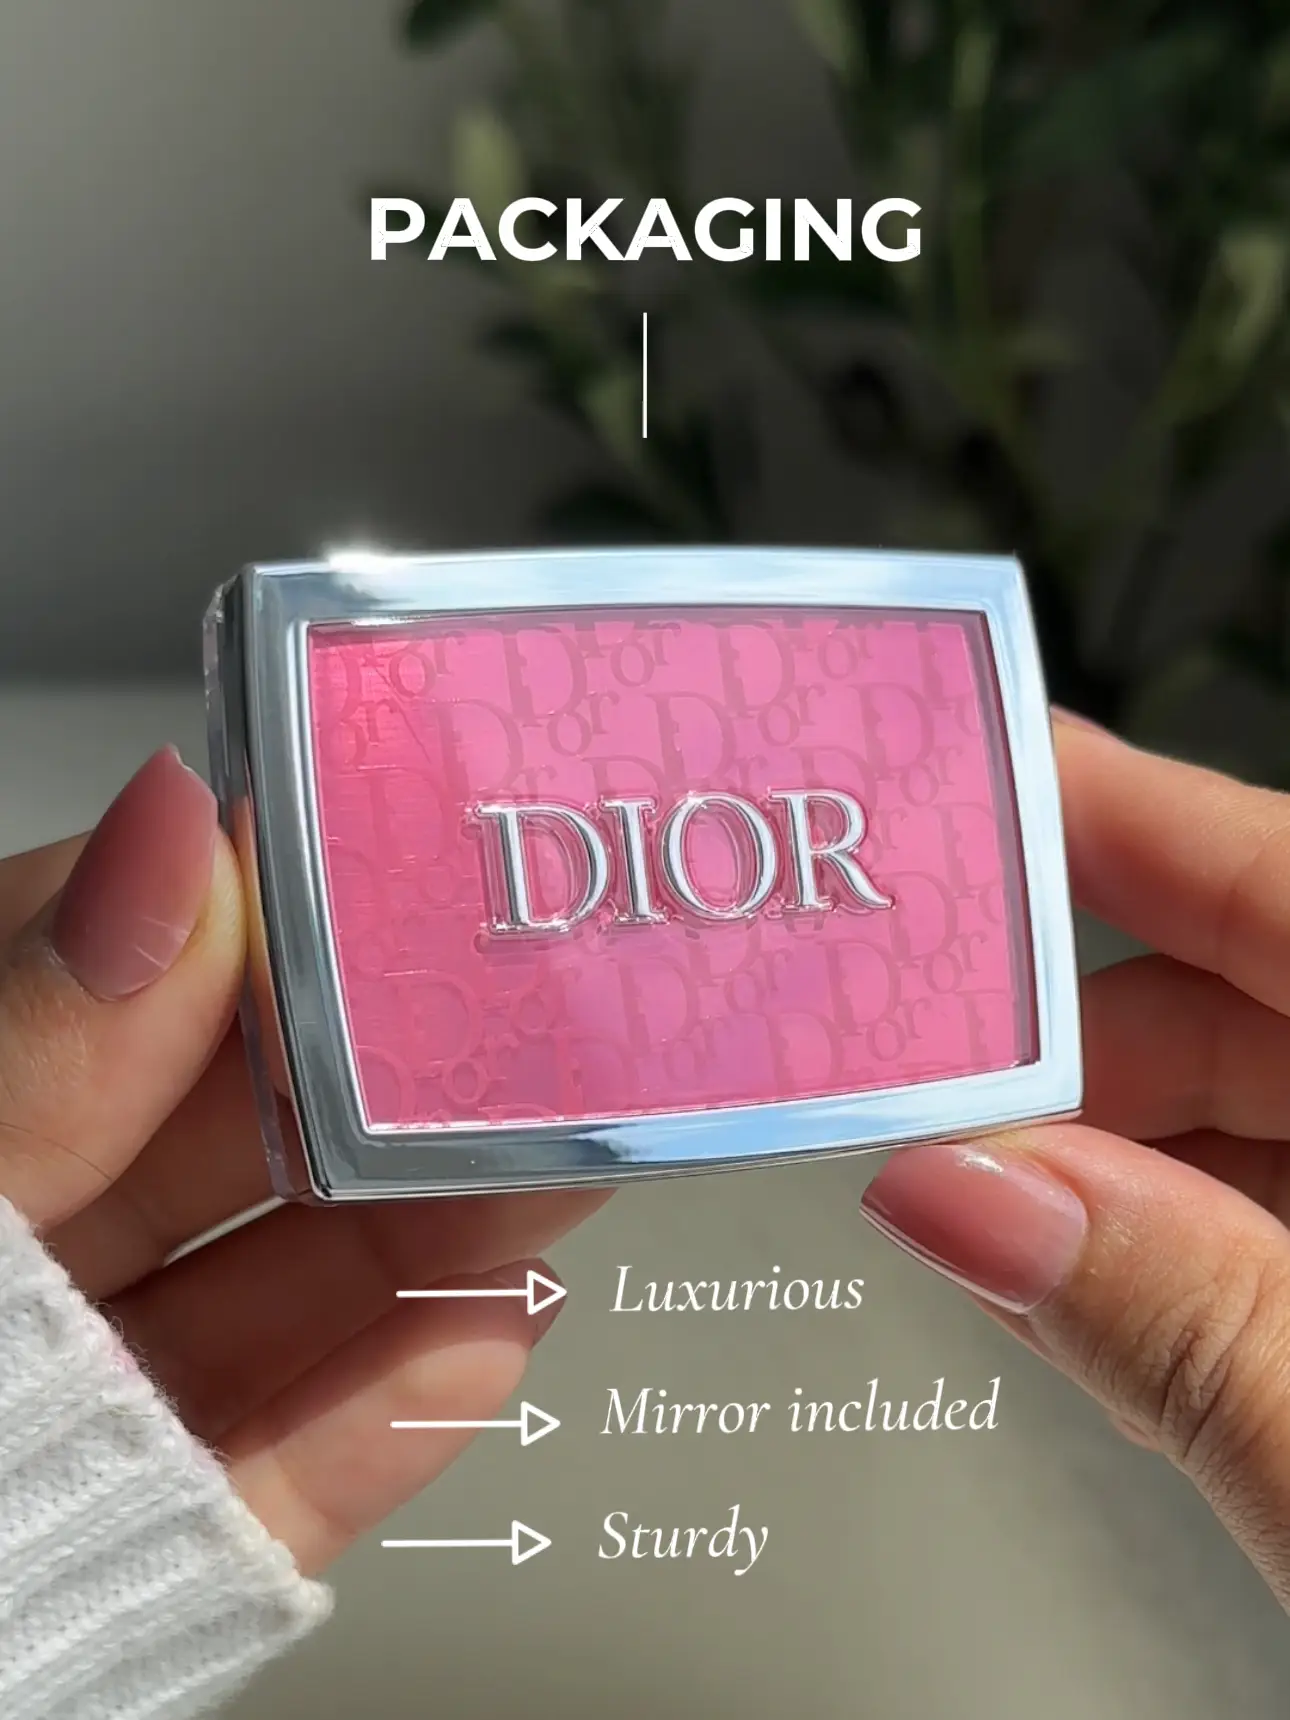 Dior Pink (001) Backstage Rosy Glow Blush Dupes & Swatch Comparisons